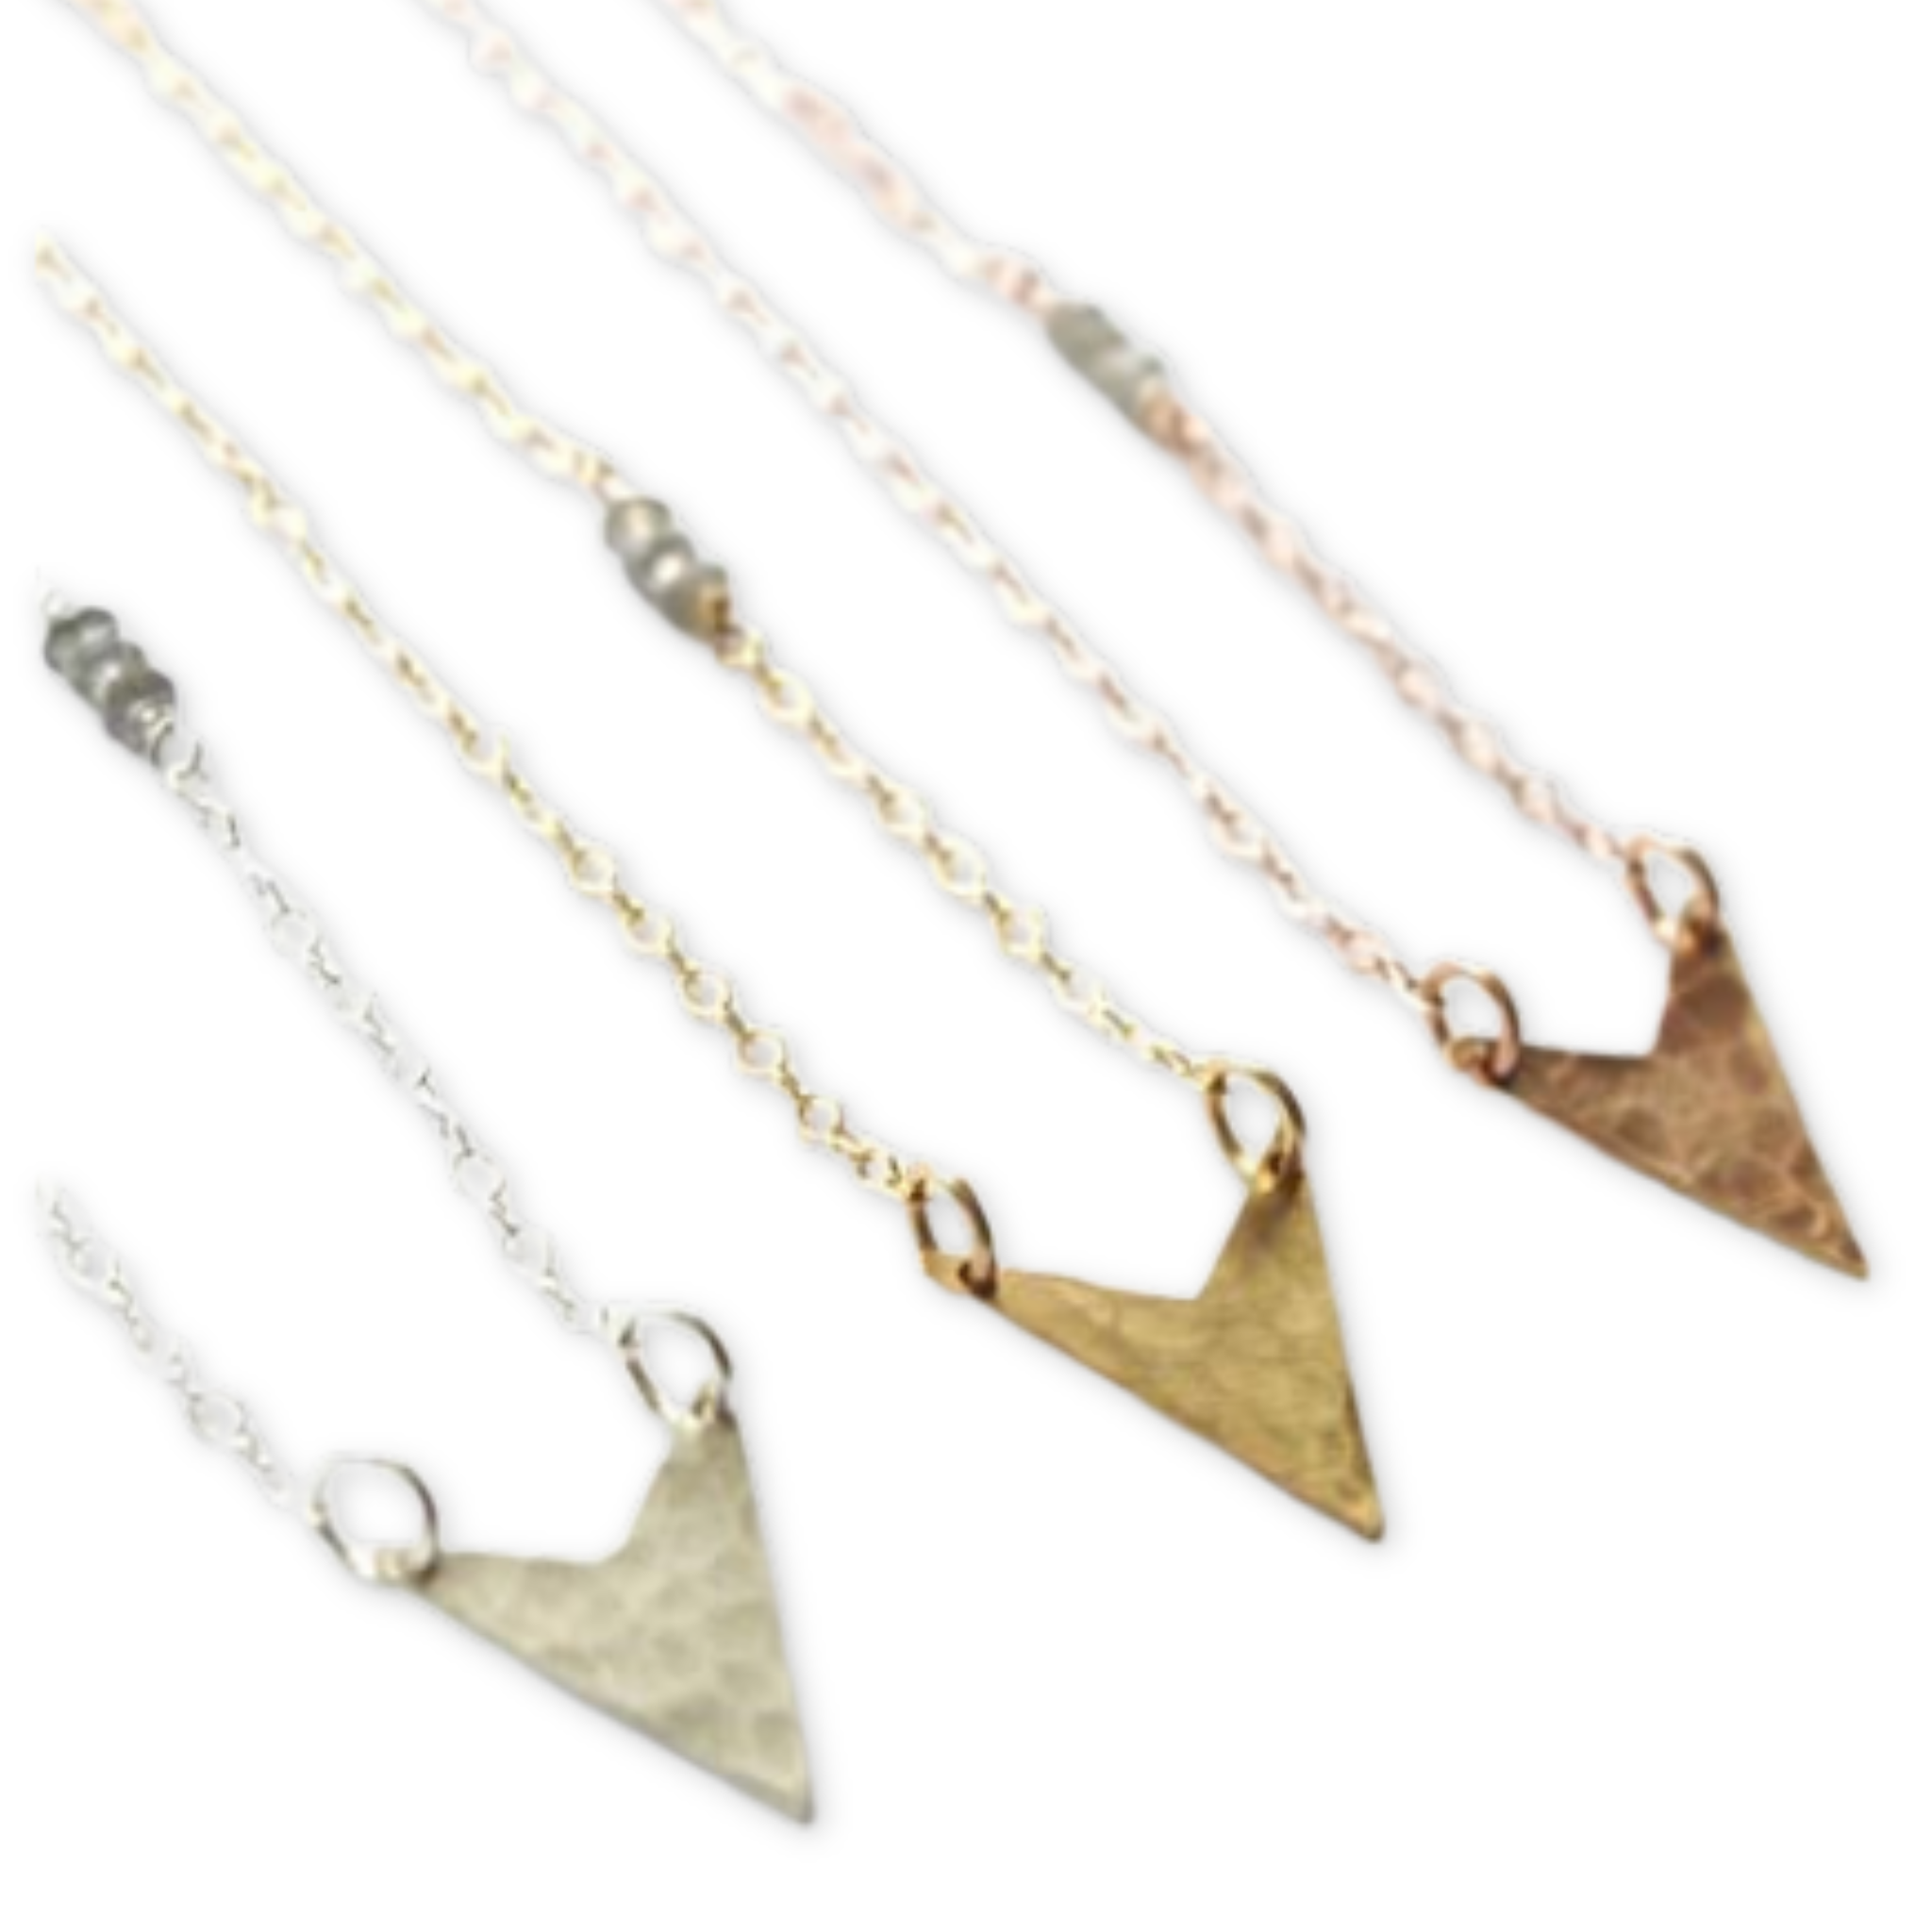 chain necklace with hammered arrowhead inspired pendant